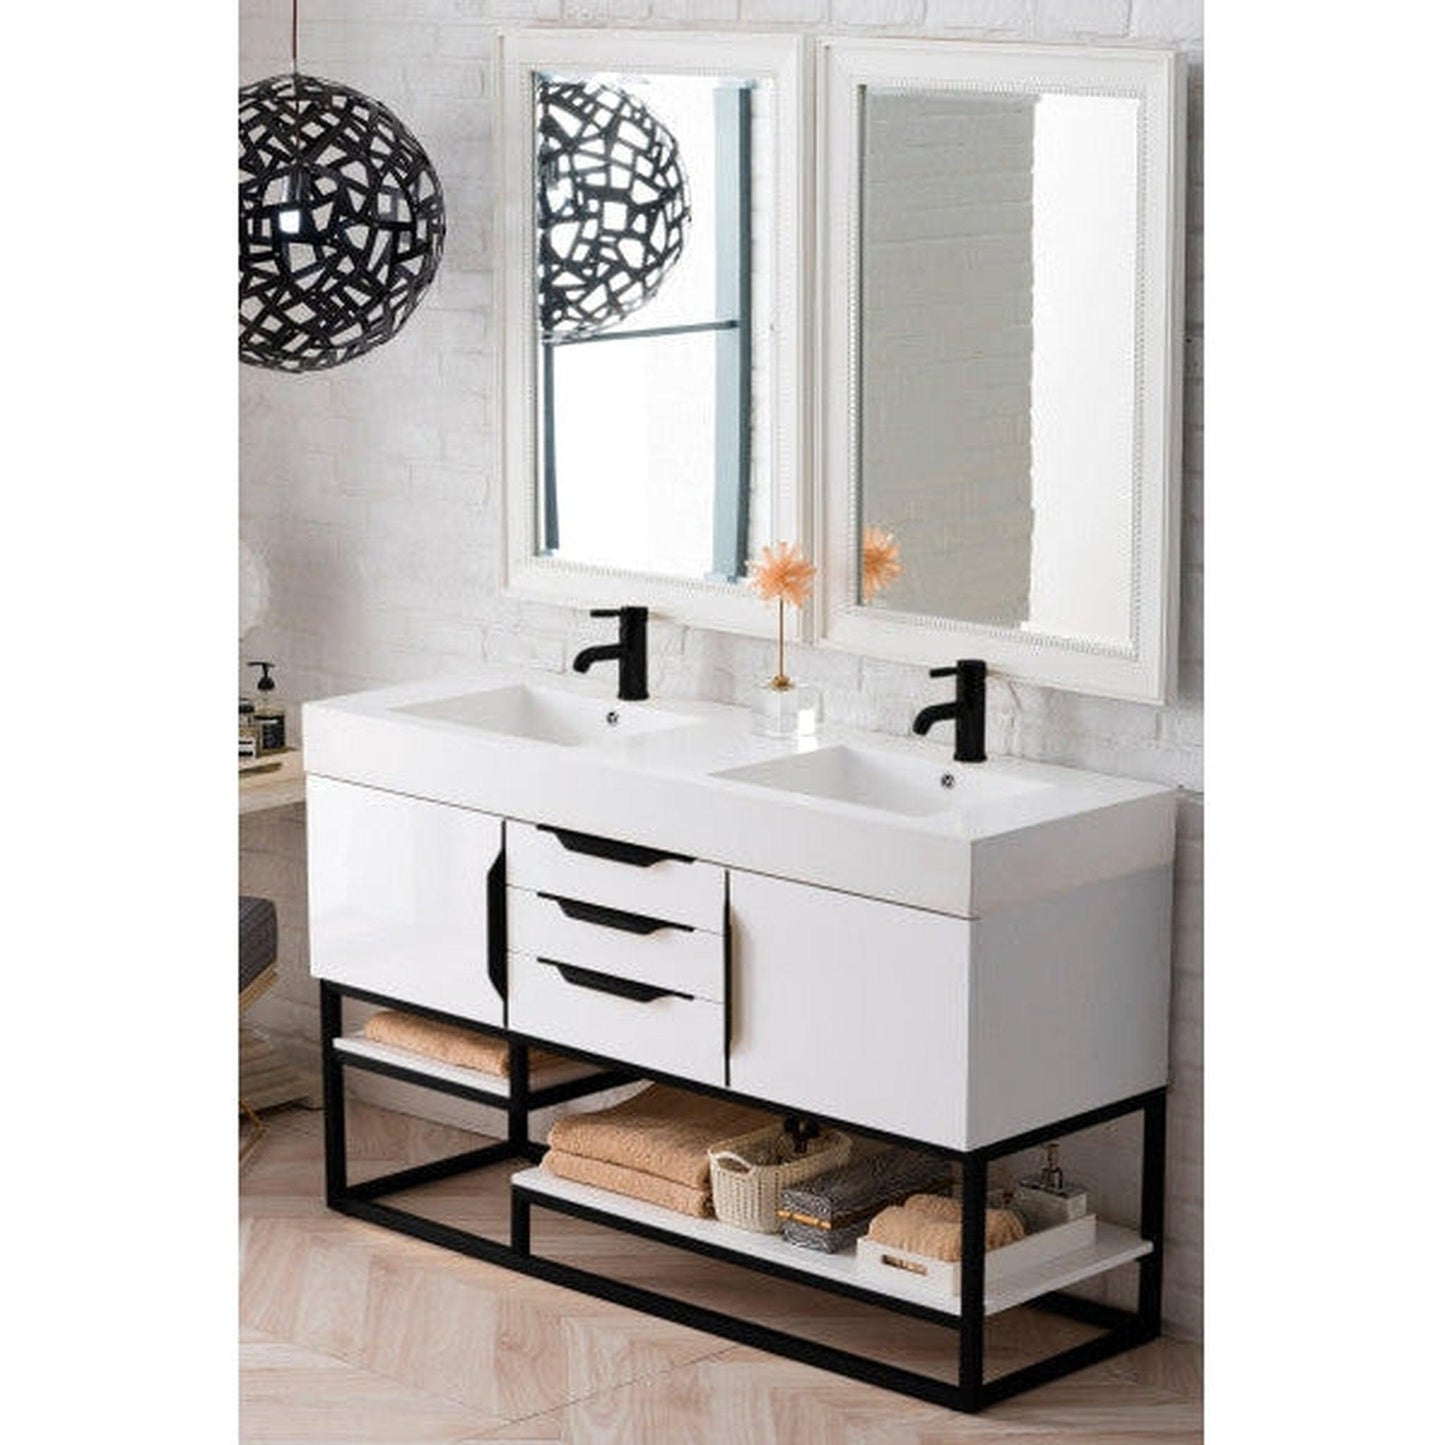 James Martin Columbia 59" Double Glossy White Bathroom Vanity With Matte Black Hardware and 6" Glossy White Composite Countertop